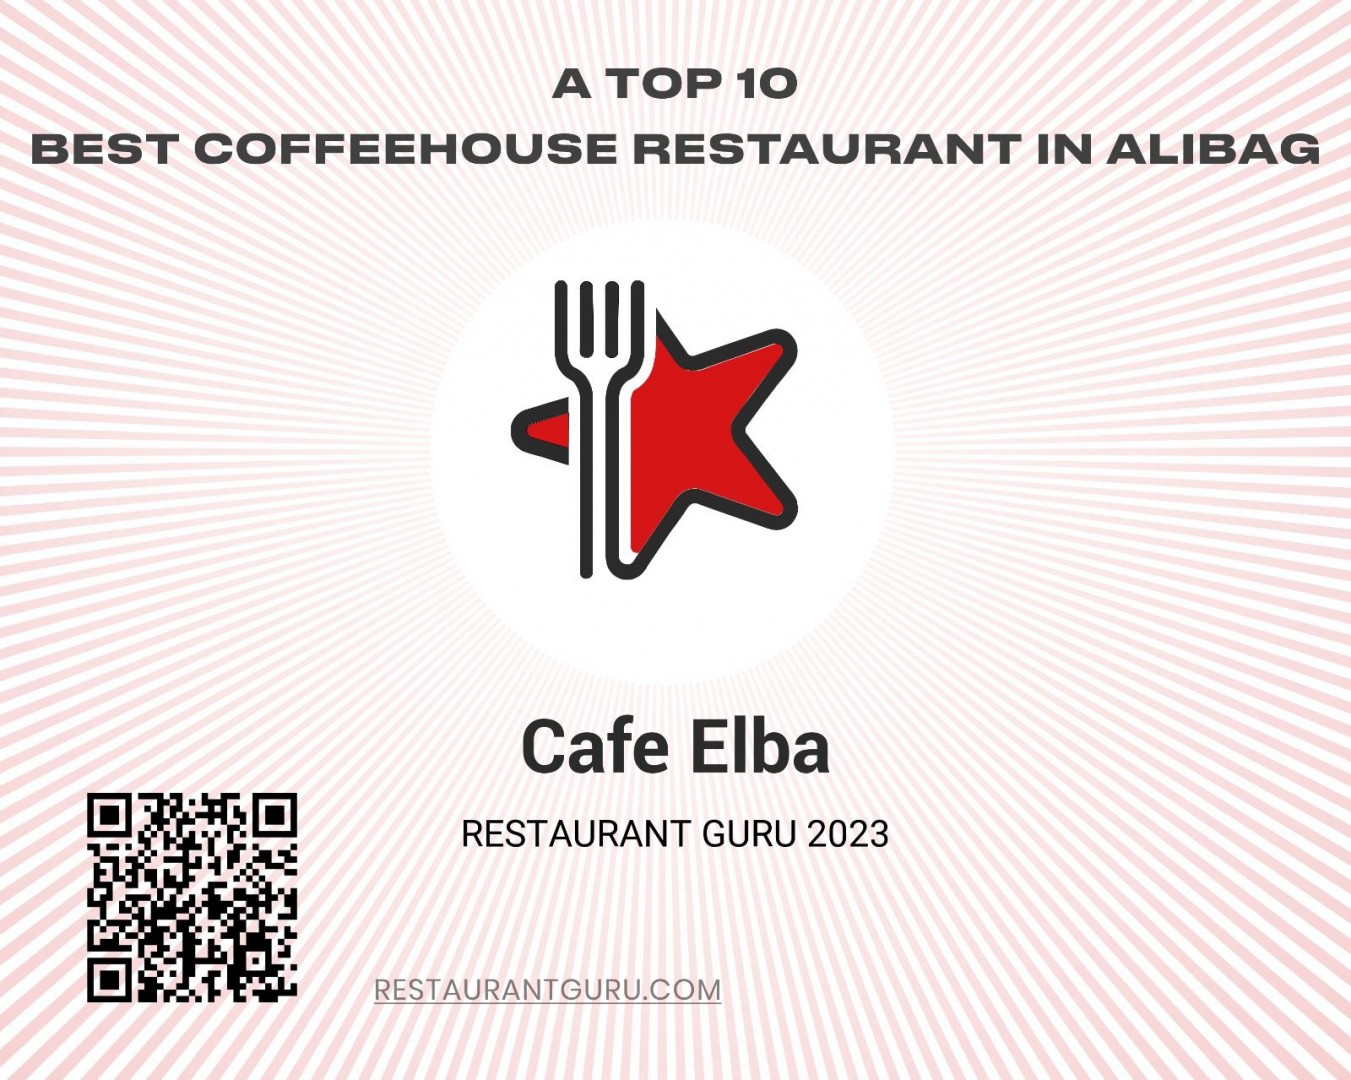 Cafe Elba in Alibag becomes recommended by Restaurant Guru 